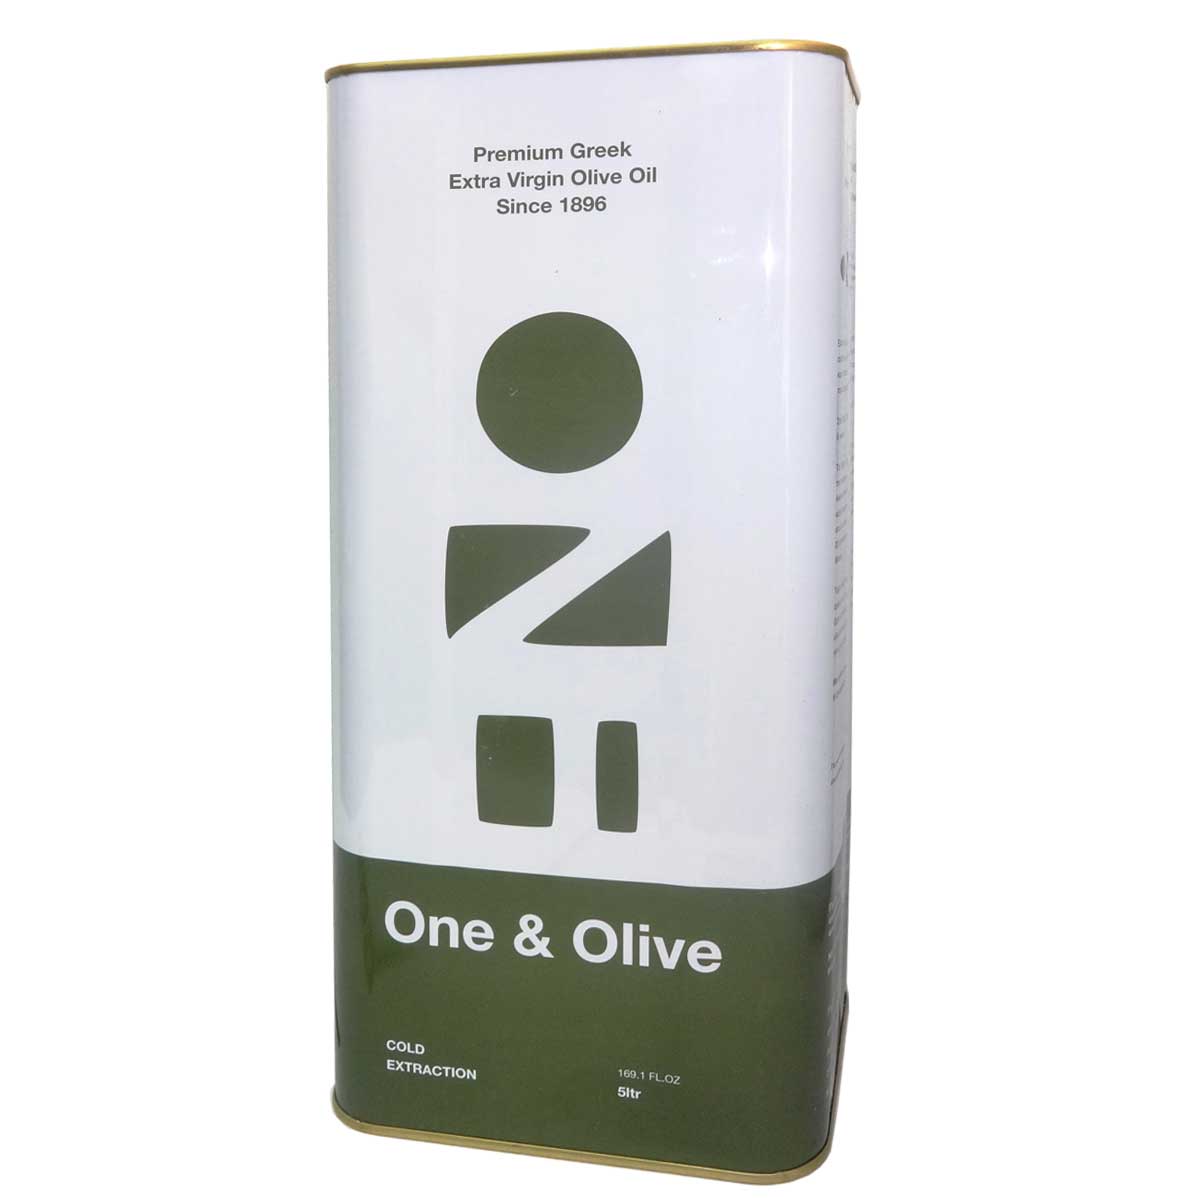 Extra Virgin Olive Oil, from Messinia Peloponnese, Acidity 0.3%, 5lt, "One & Olive"